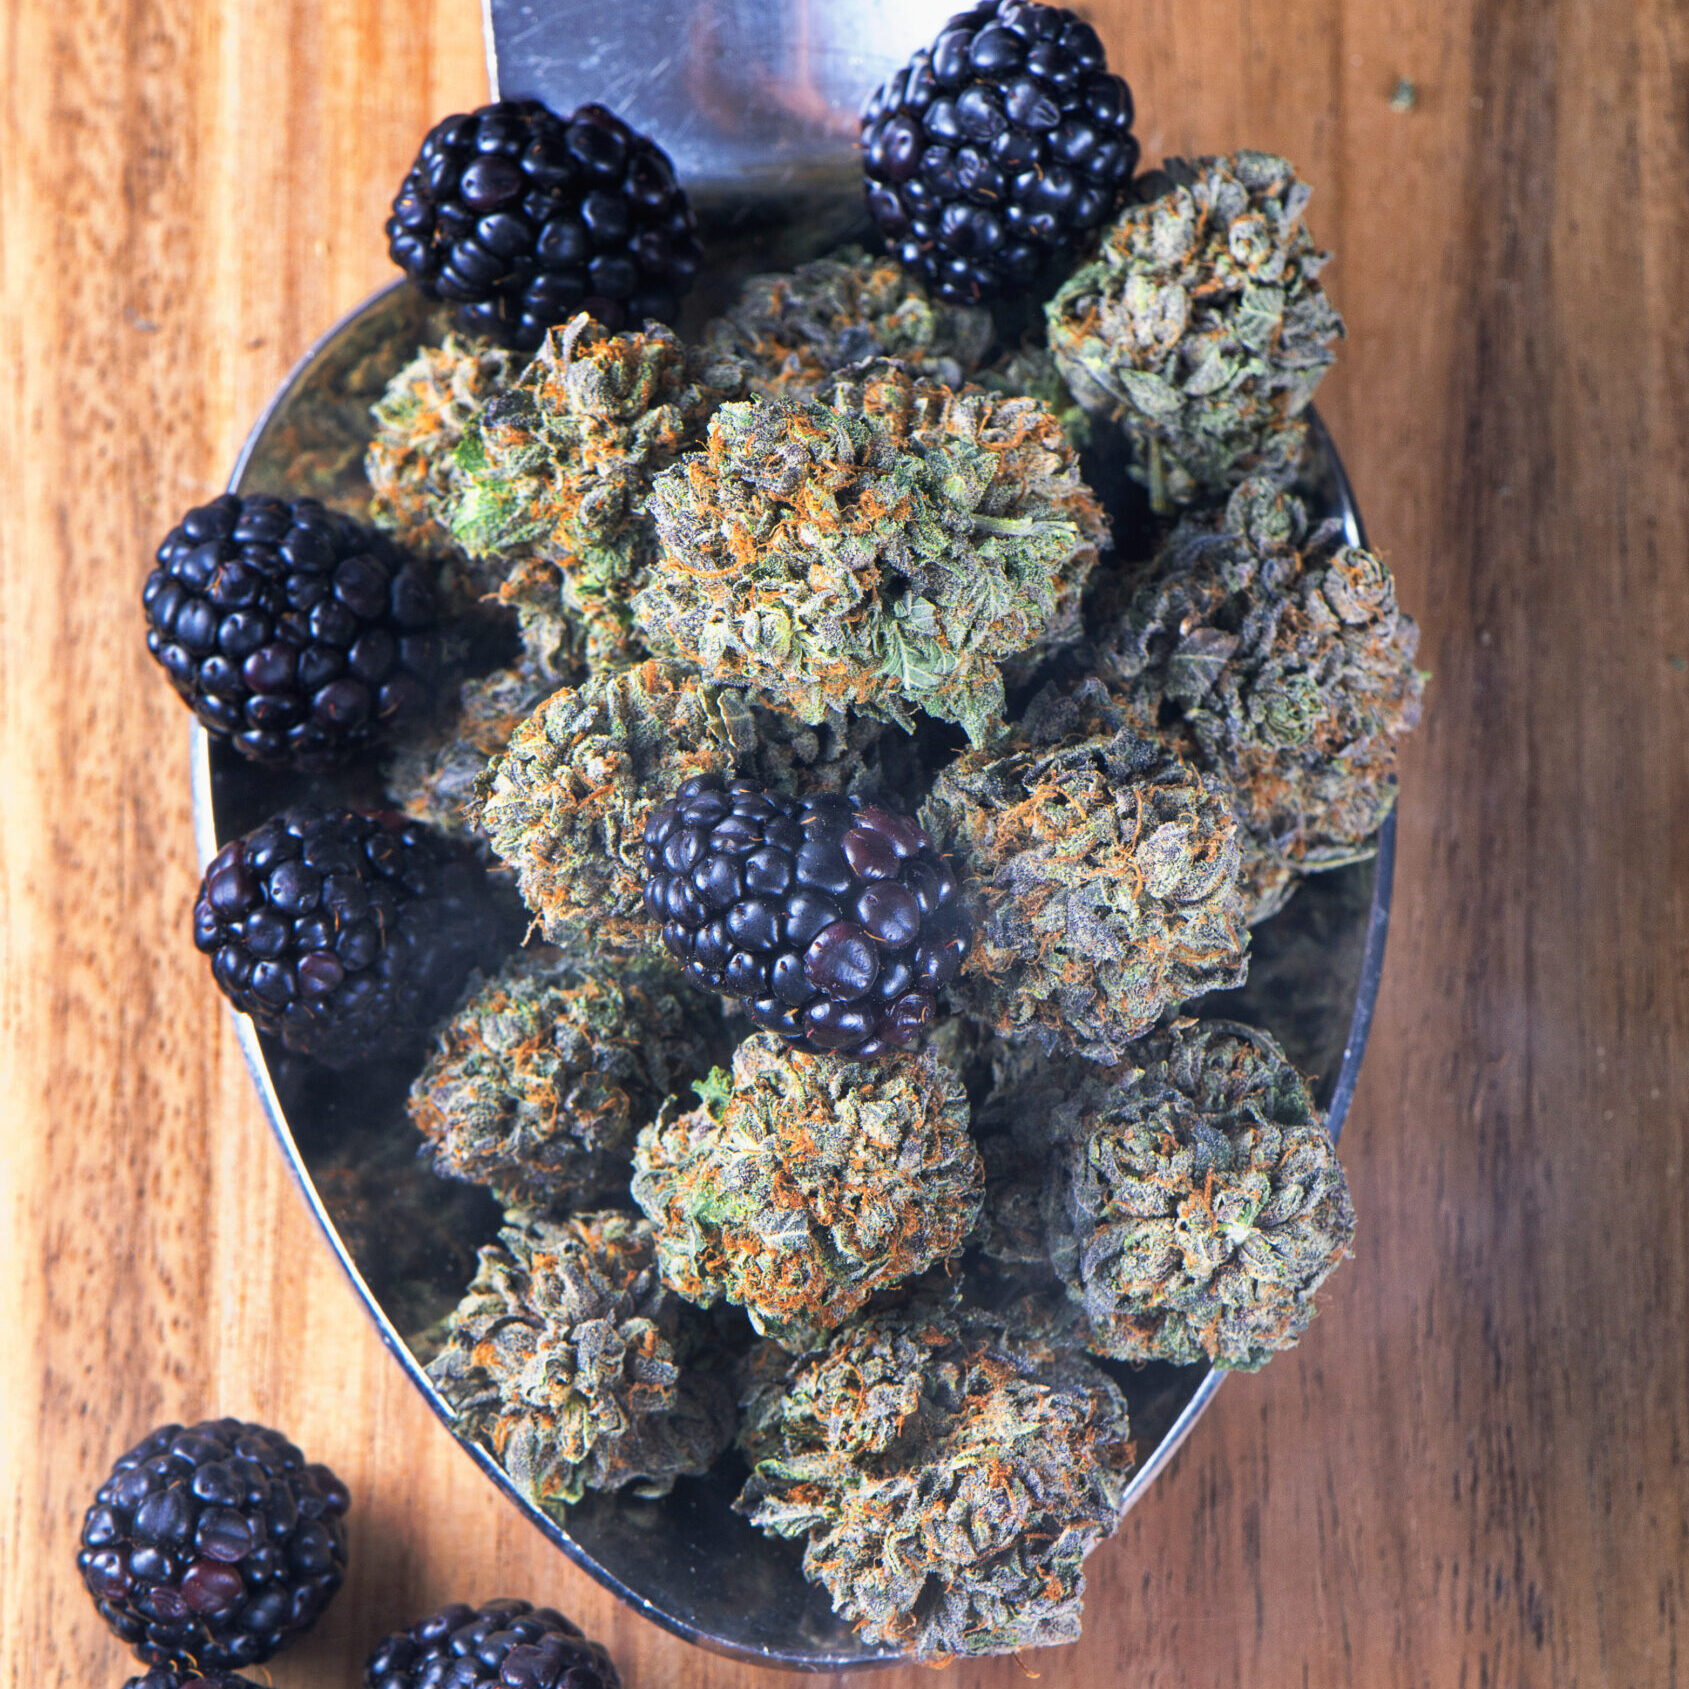 Berries and cannabis displayed on a wooden board